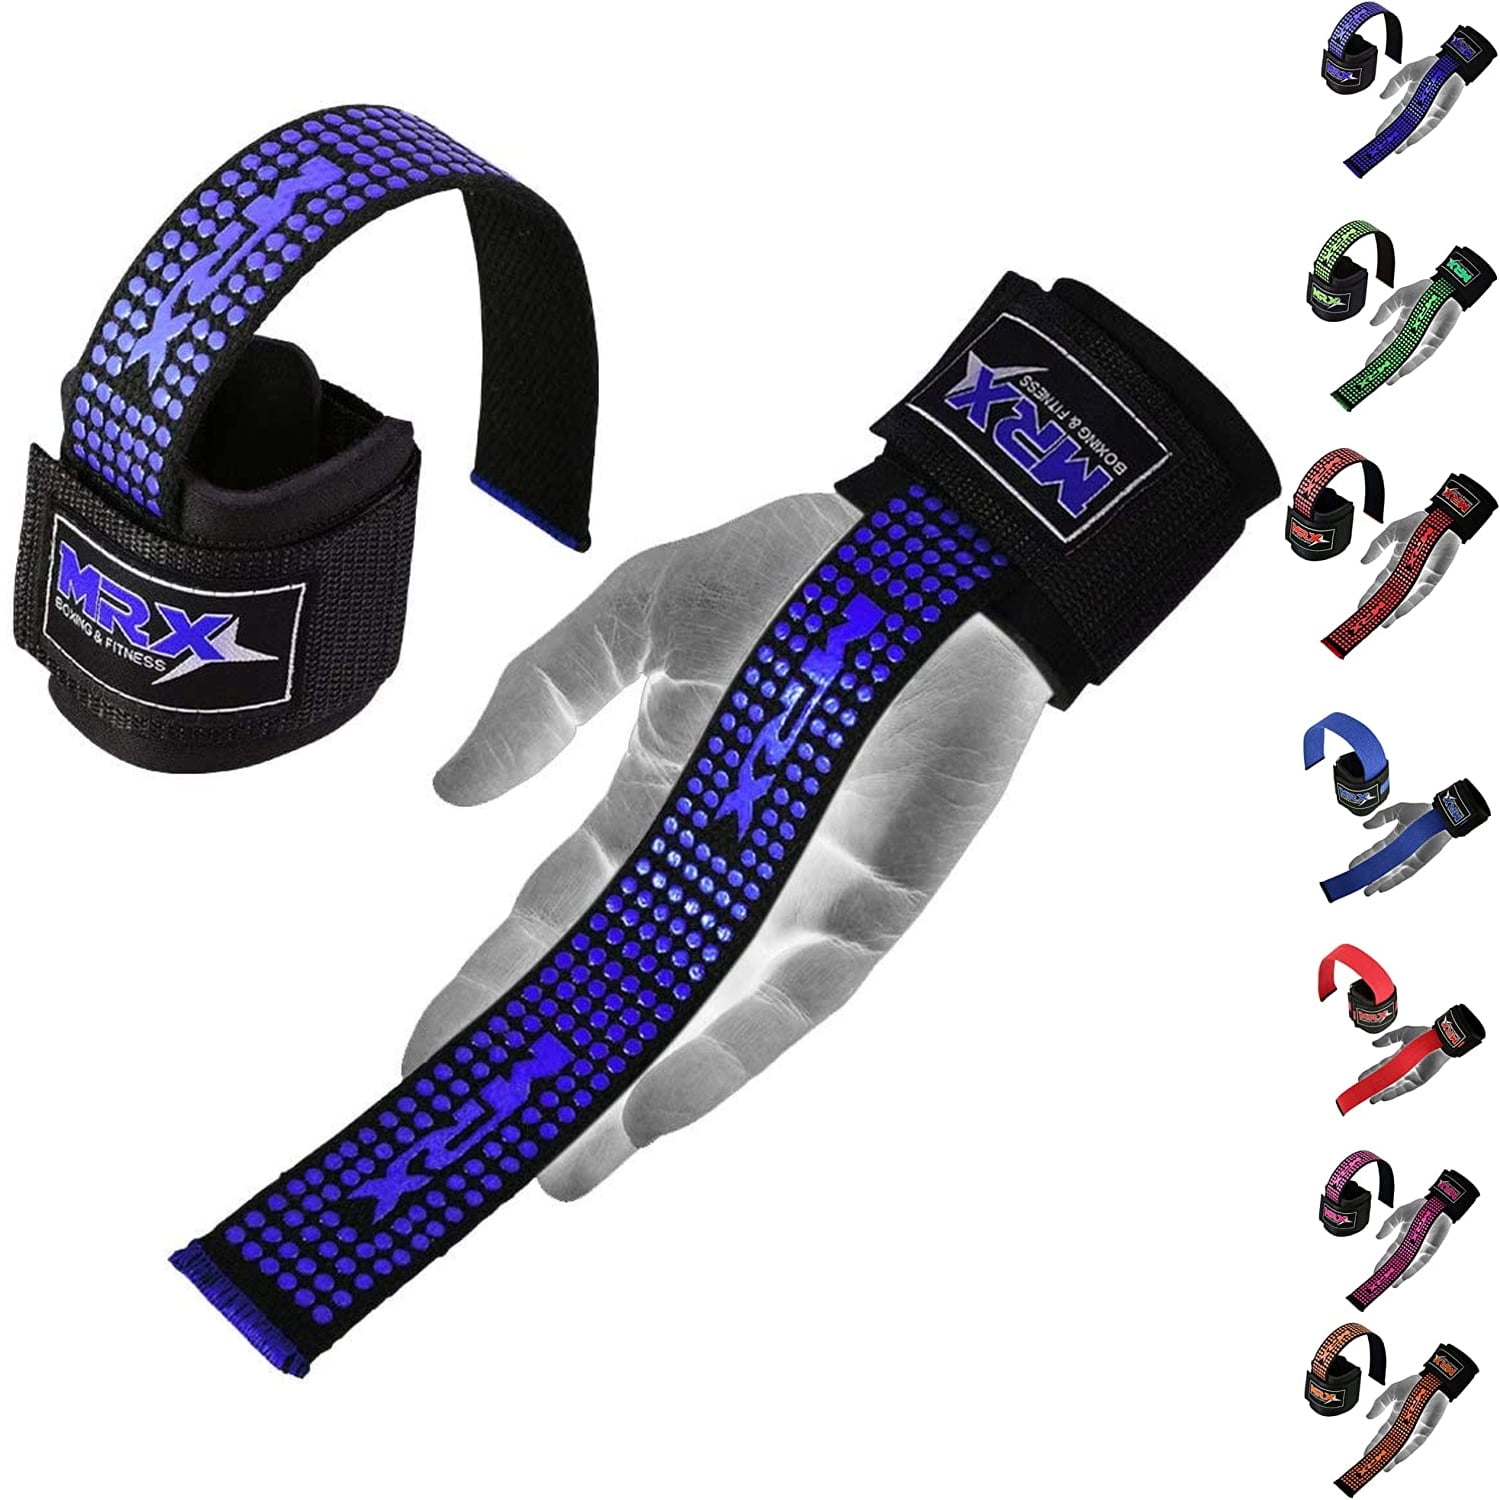 new] Weight lifting Wrist Straps Fitness Bodybuilding Training Gym lifting  straps [lucaiitn]